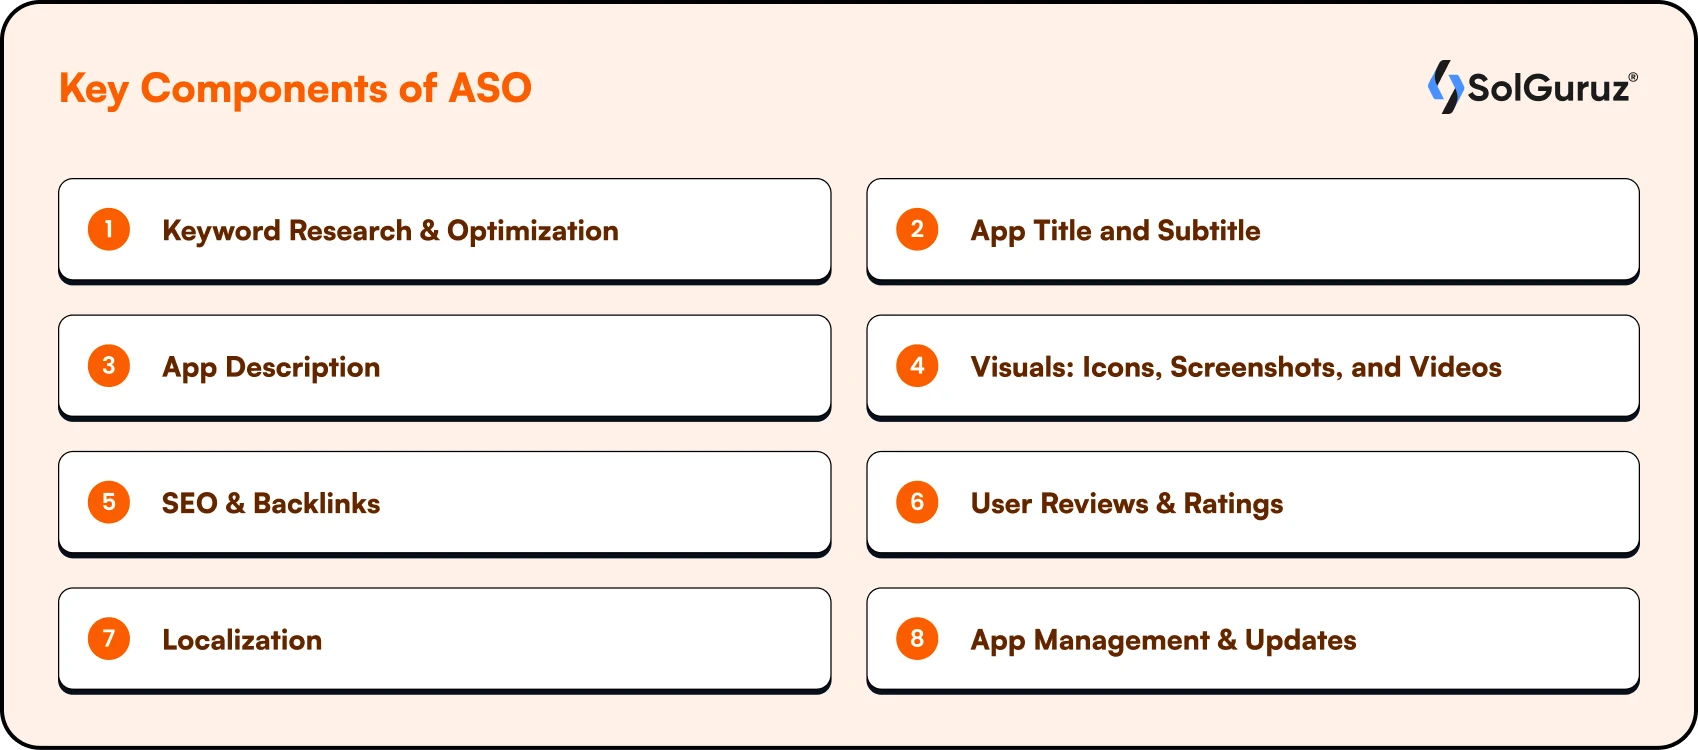 Key Components of ASO (App Store Optimisation)